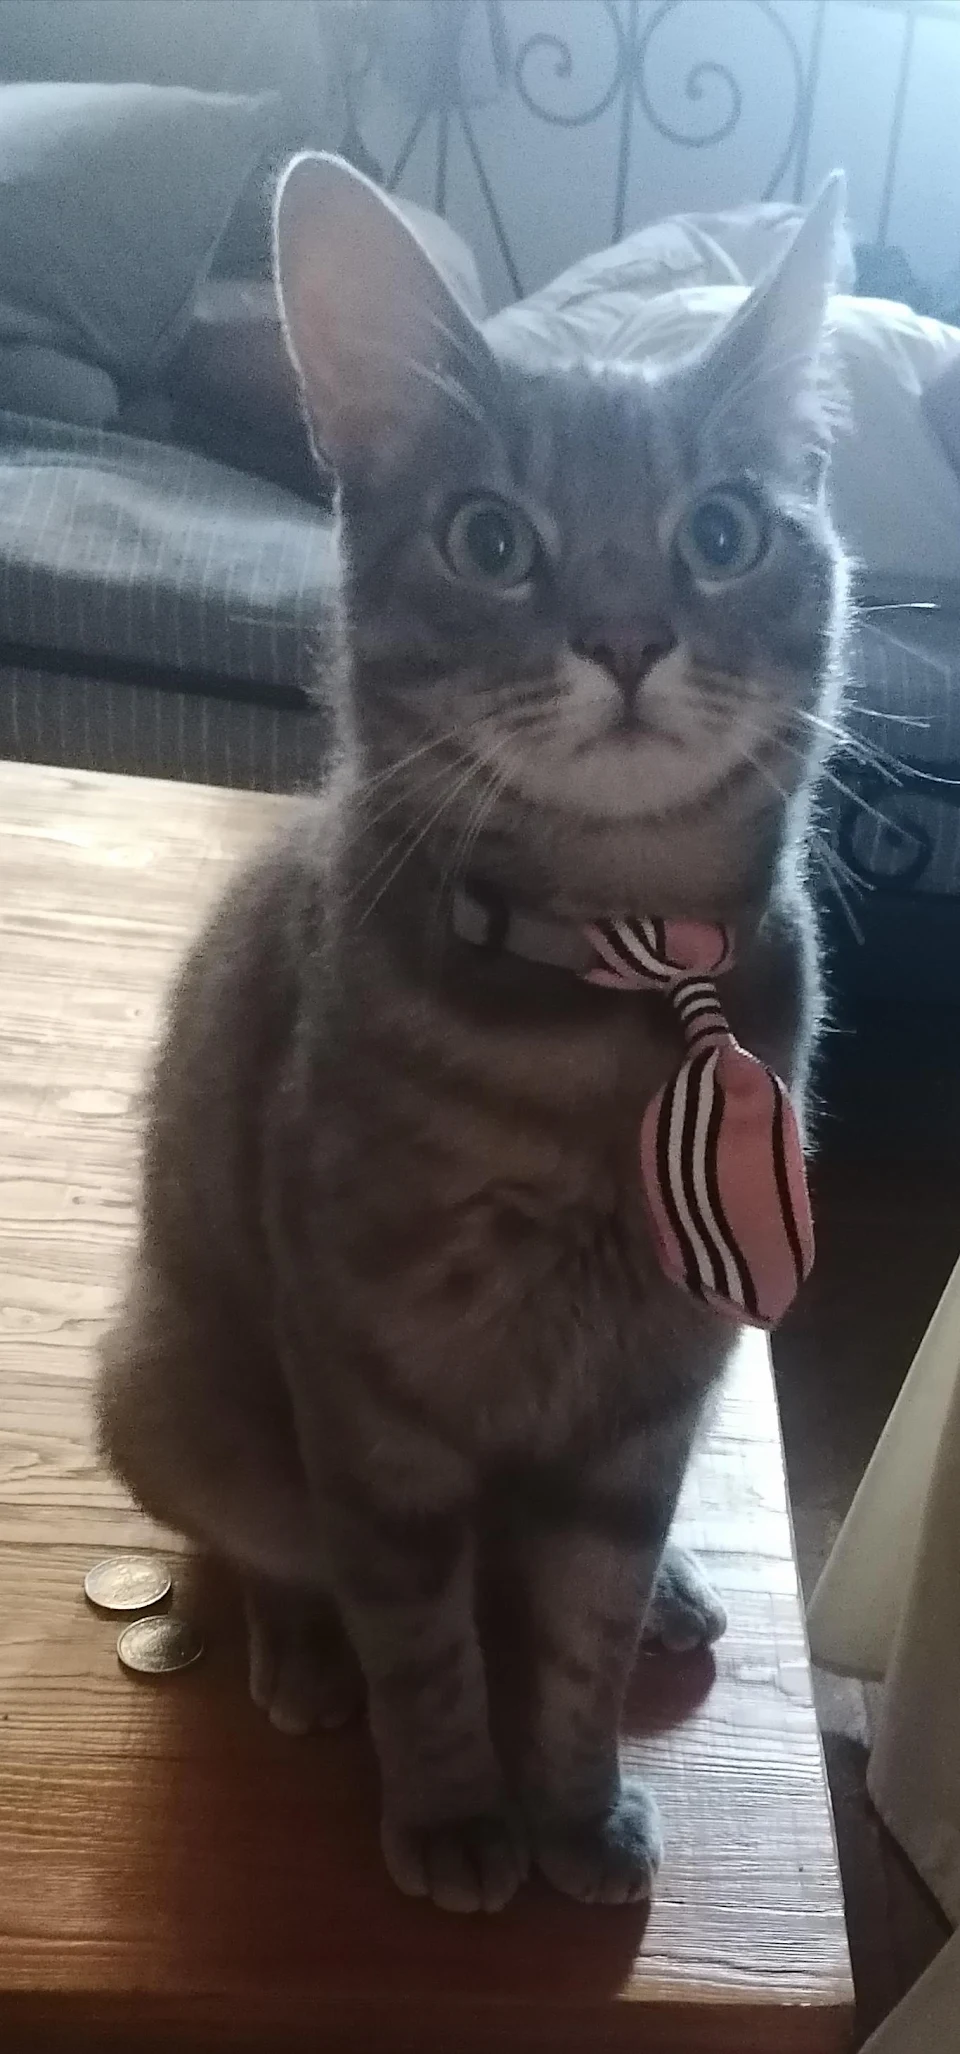 That tie was my best purchase ever